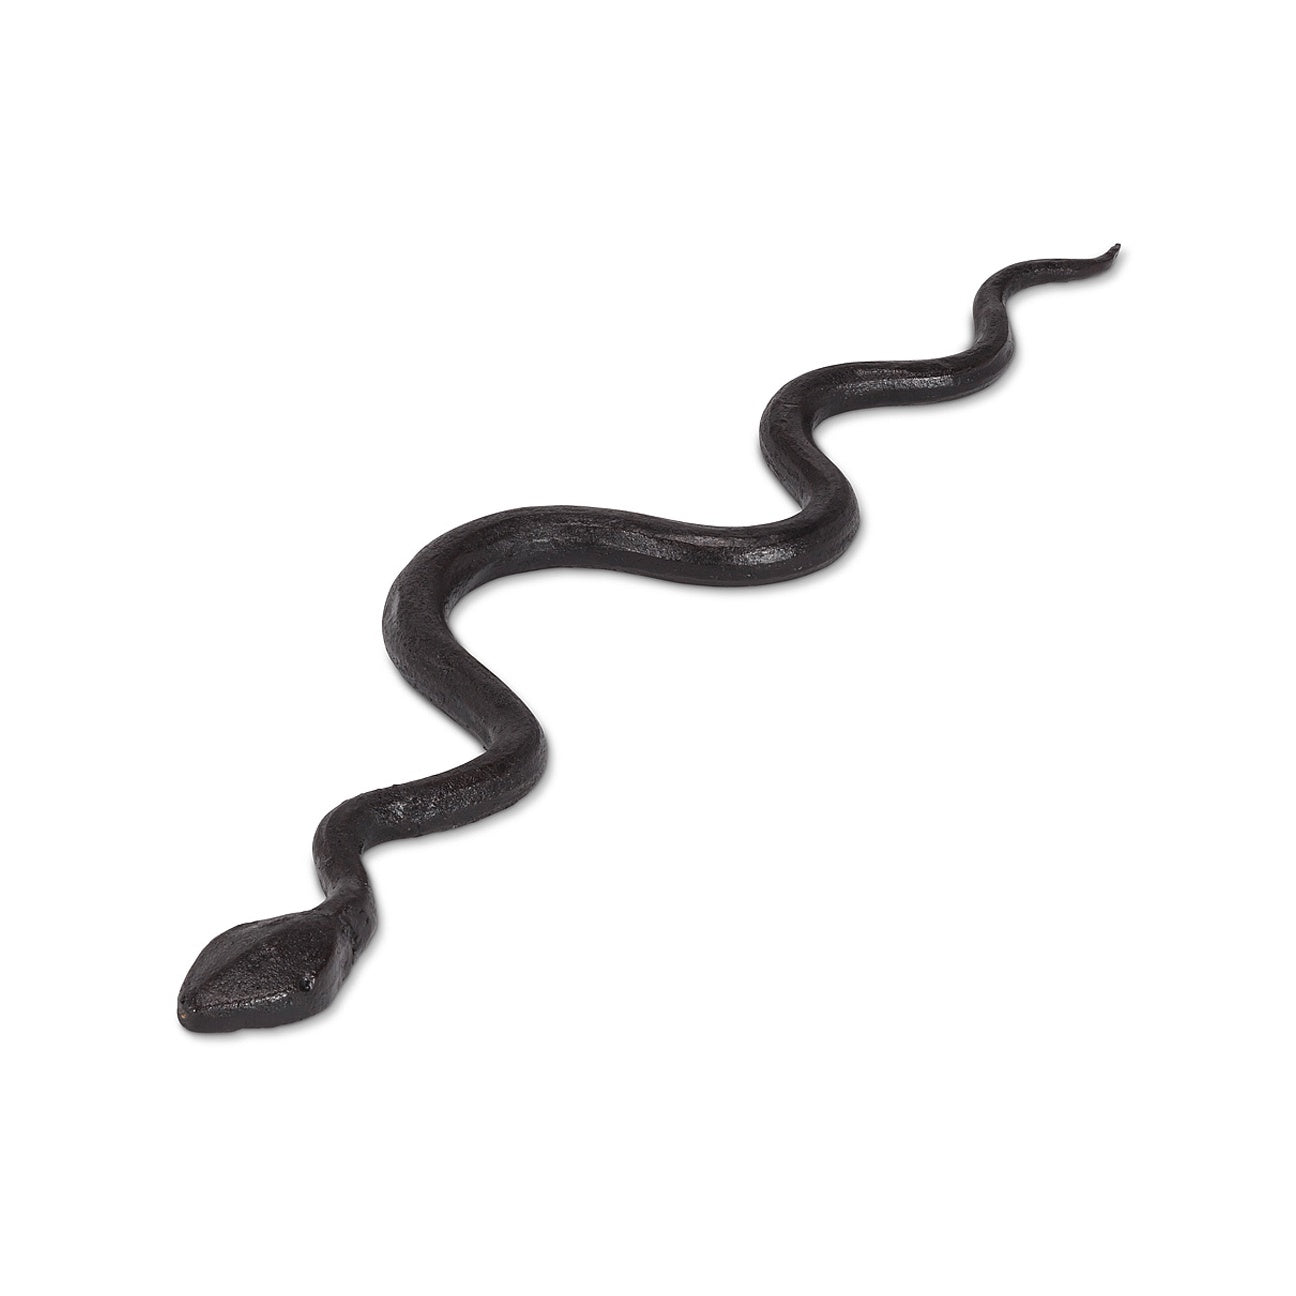 Cast Iron Squirming Snake